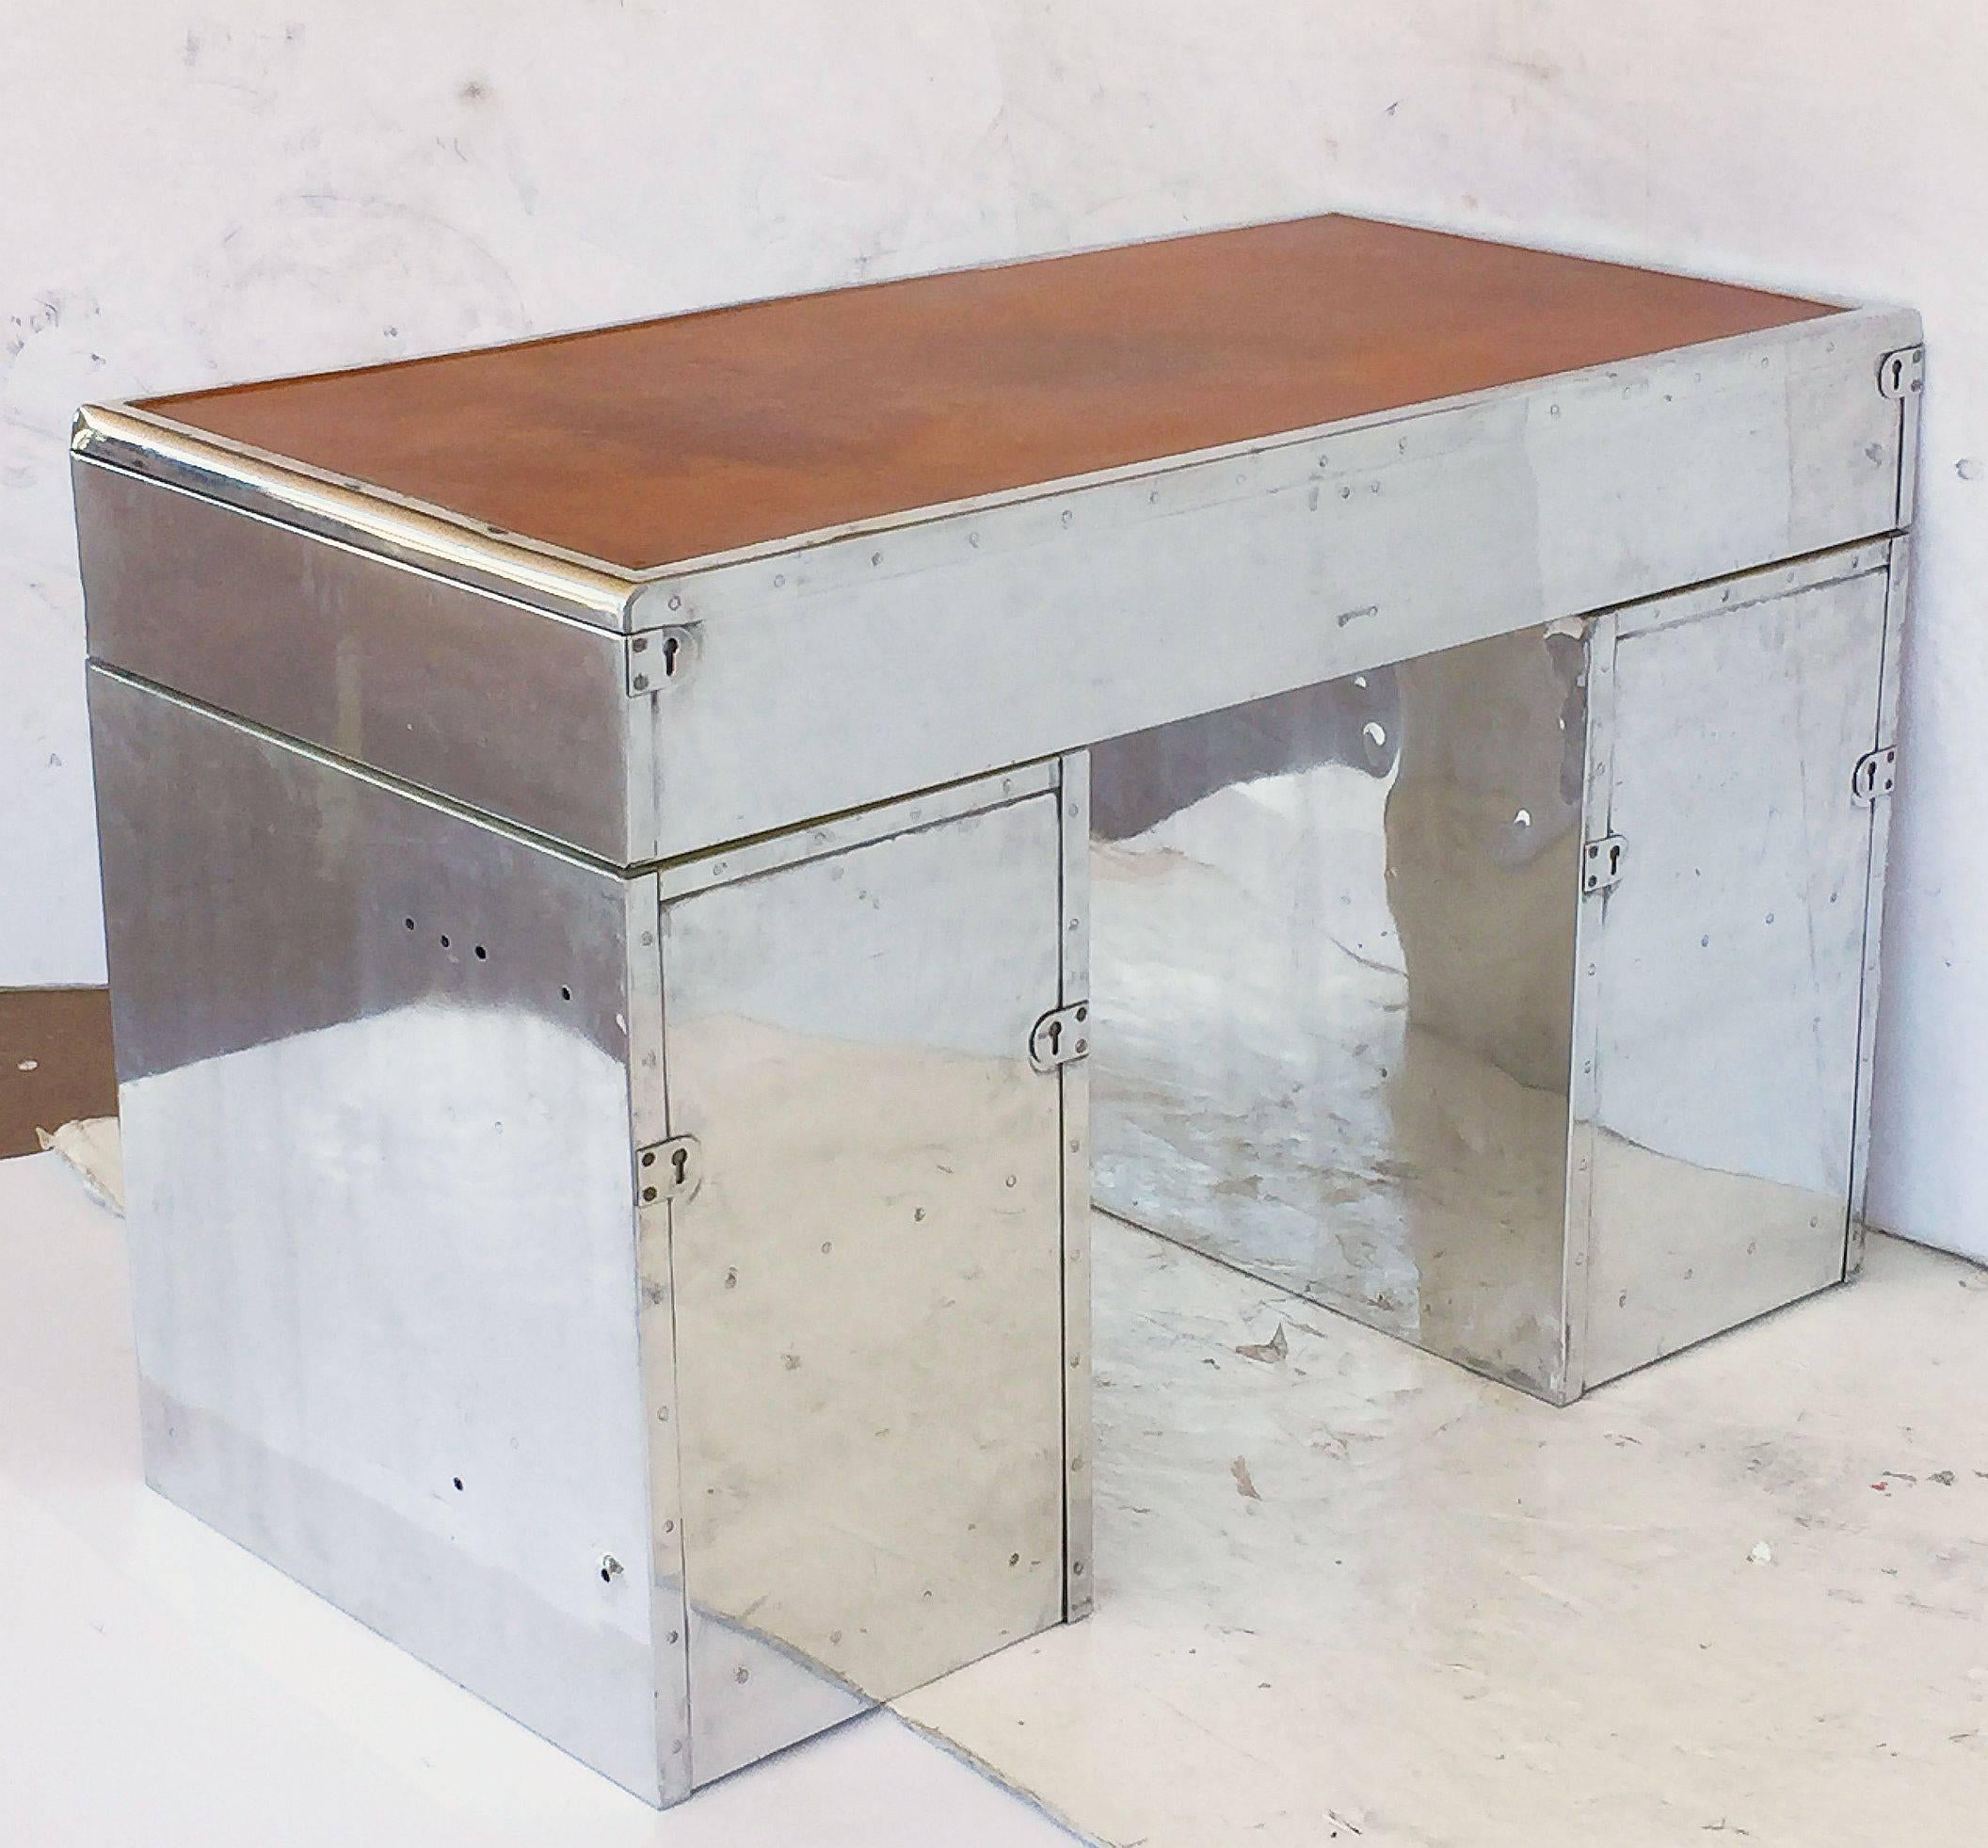 Metal Polished Aluminum English Marine or Nautical Pedestal Desk with Leather Top